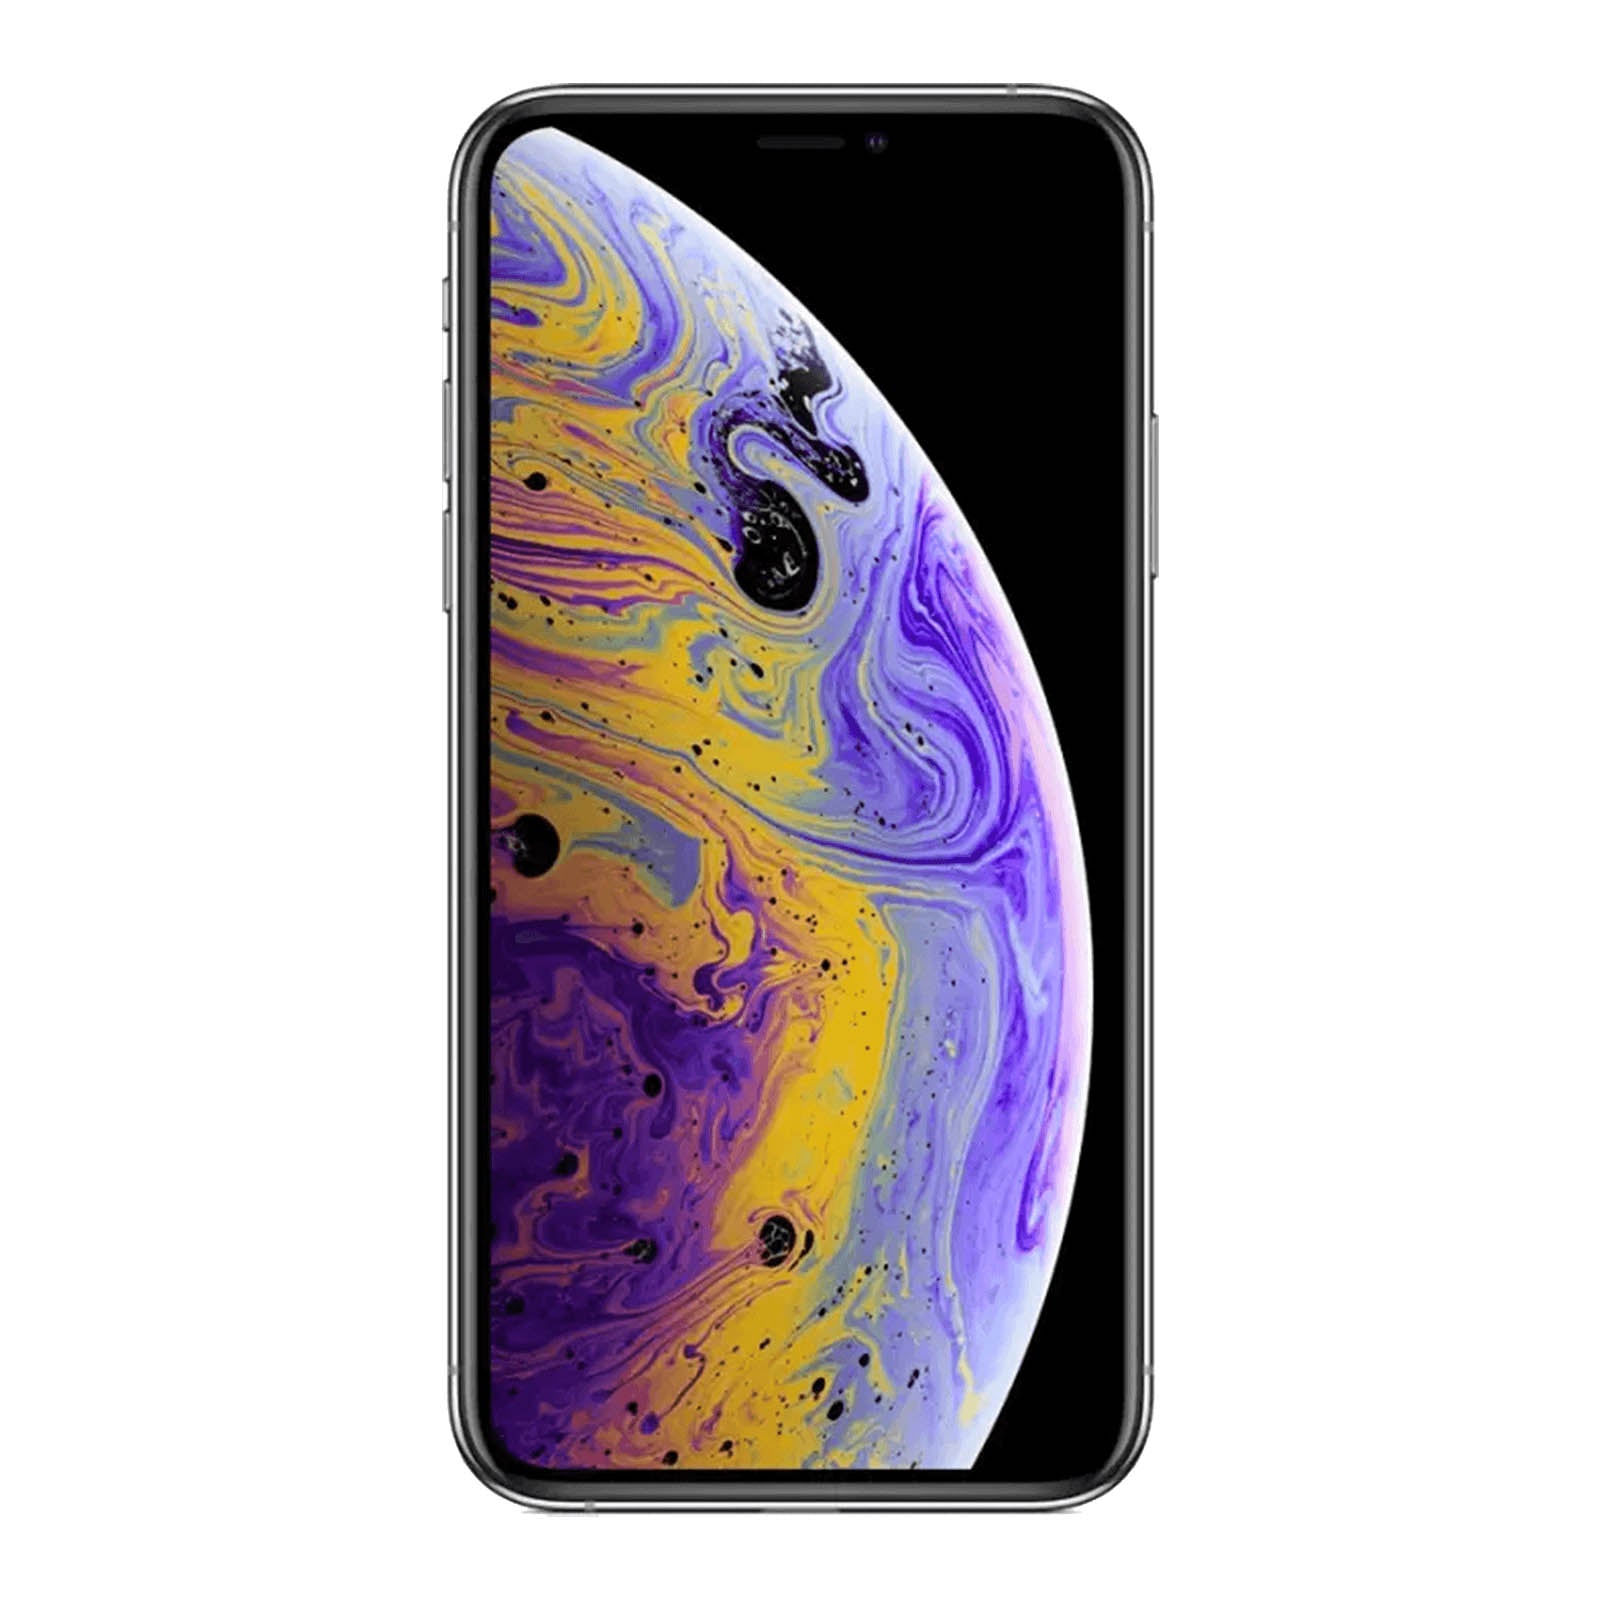 Apple iPhone XS Max 512GB Silver – Loop Mobile - US